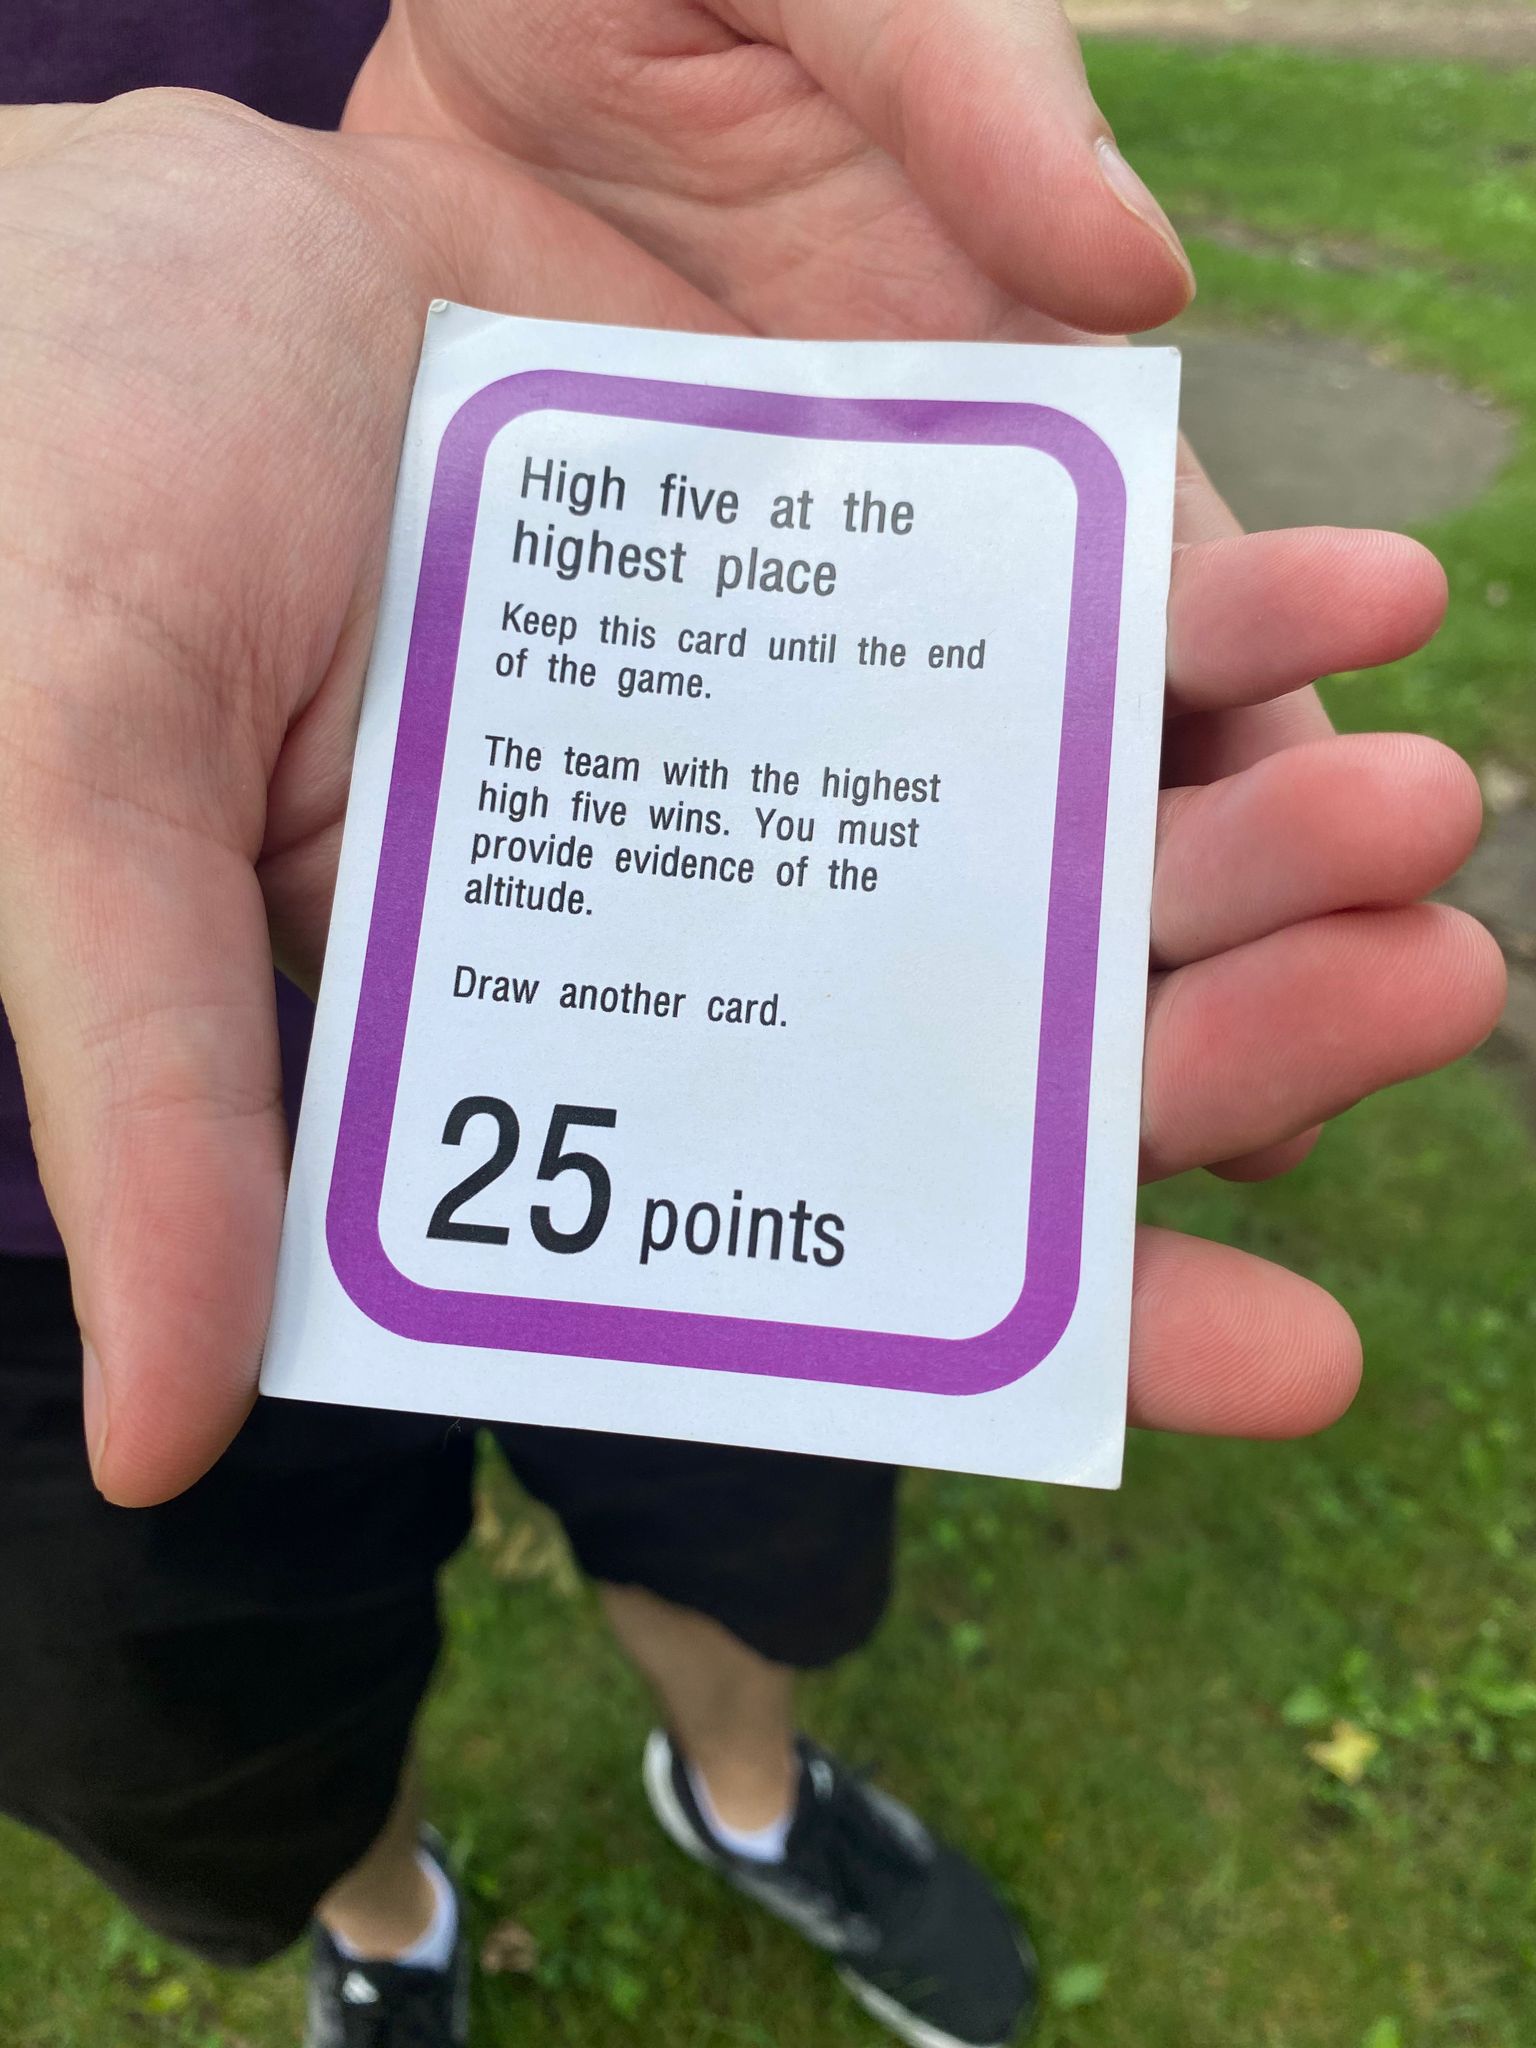 High five at the highest place. Keep this card until the end of the game. The team with the highest high five wins. You must provide evidence of the altitude. Draw another card. 25 points.